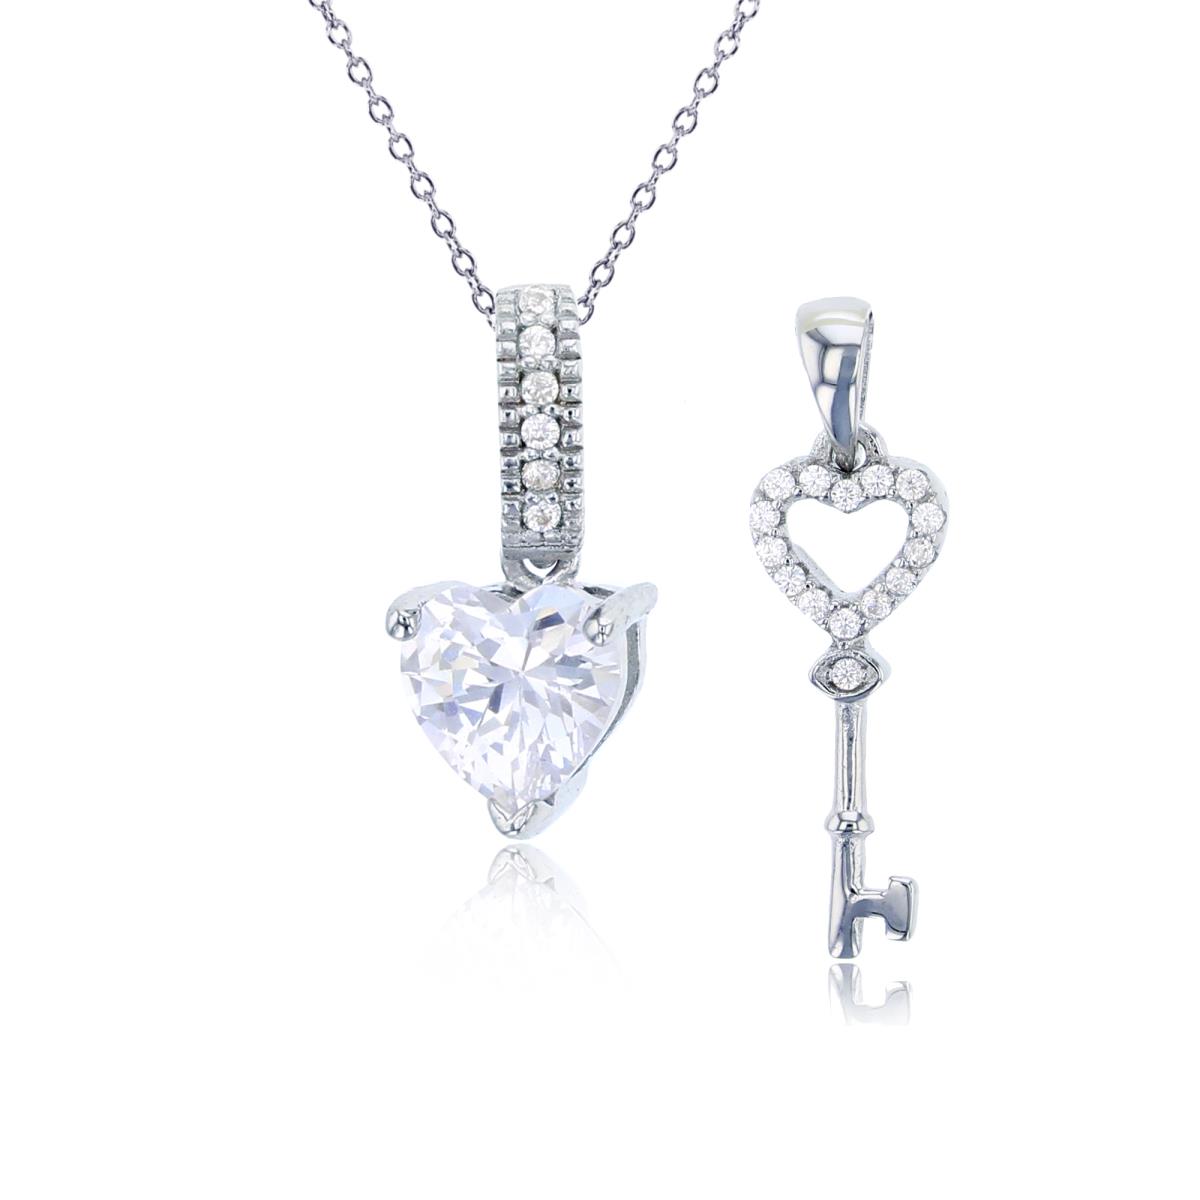 Sterling Silver Rhodium Rd CZ Heart Key & 6mm Heart Cut Set of 2 Pendants with 18" Chain